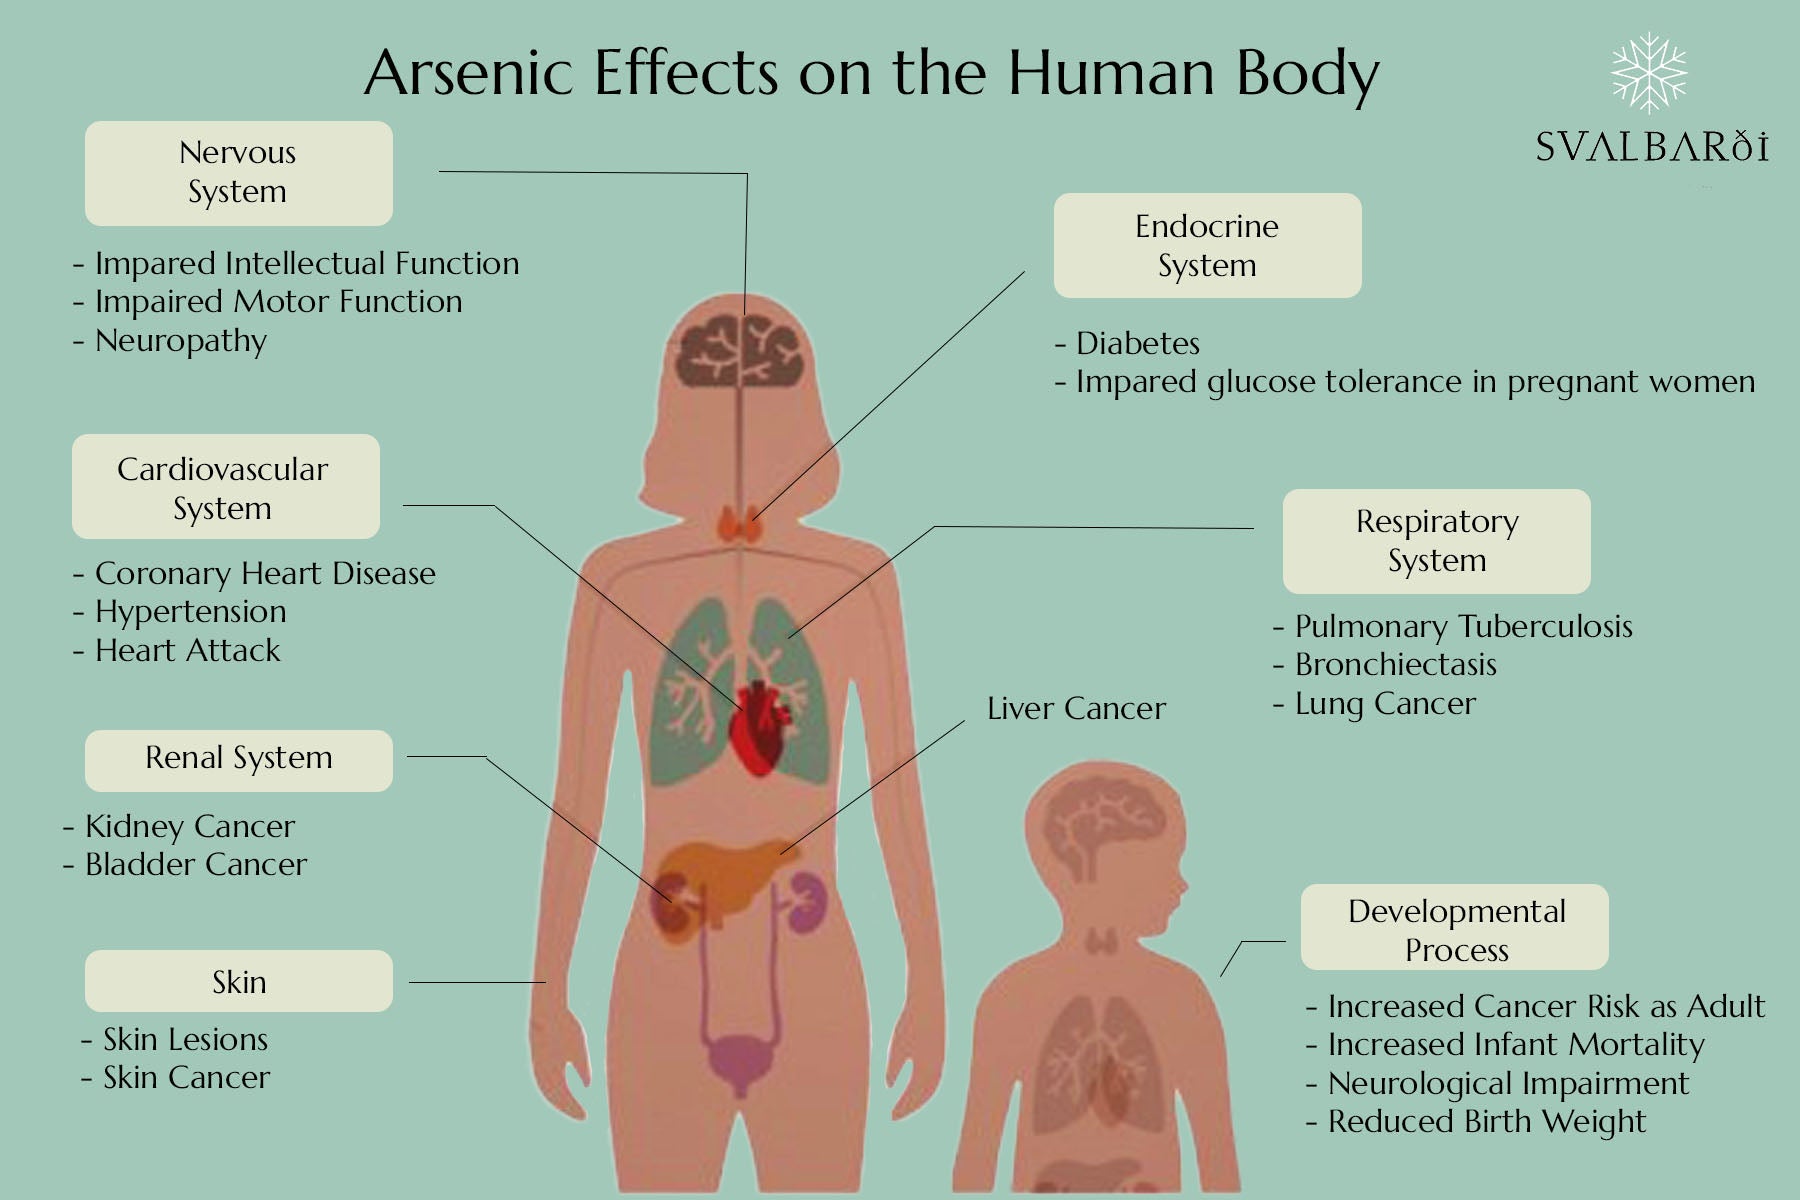 Affect of Arsenic on Human Body